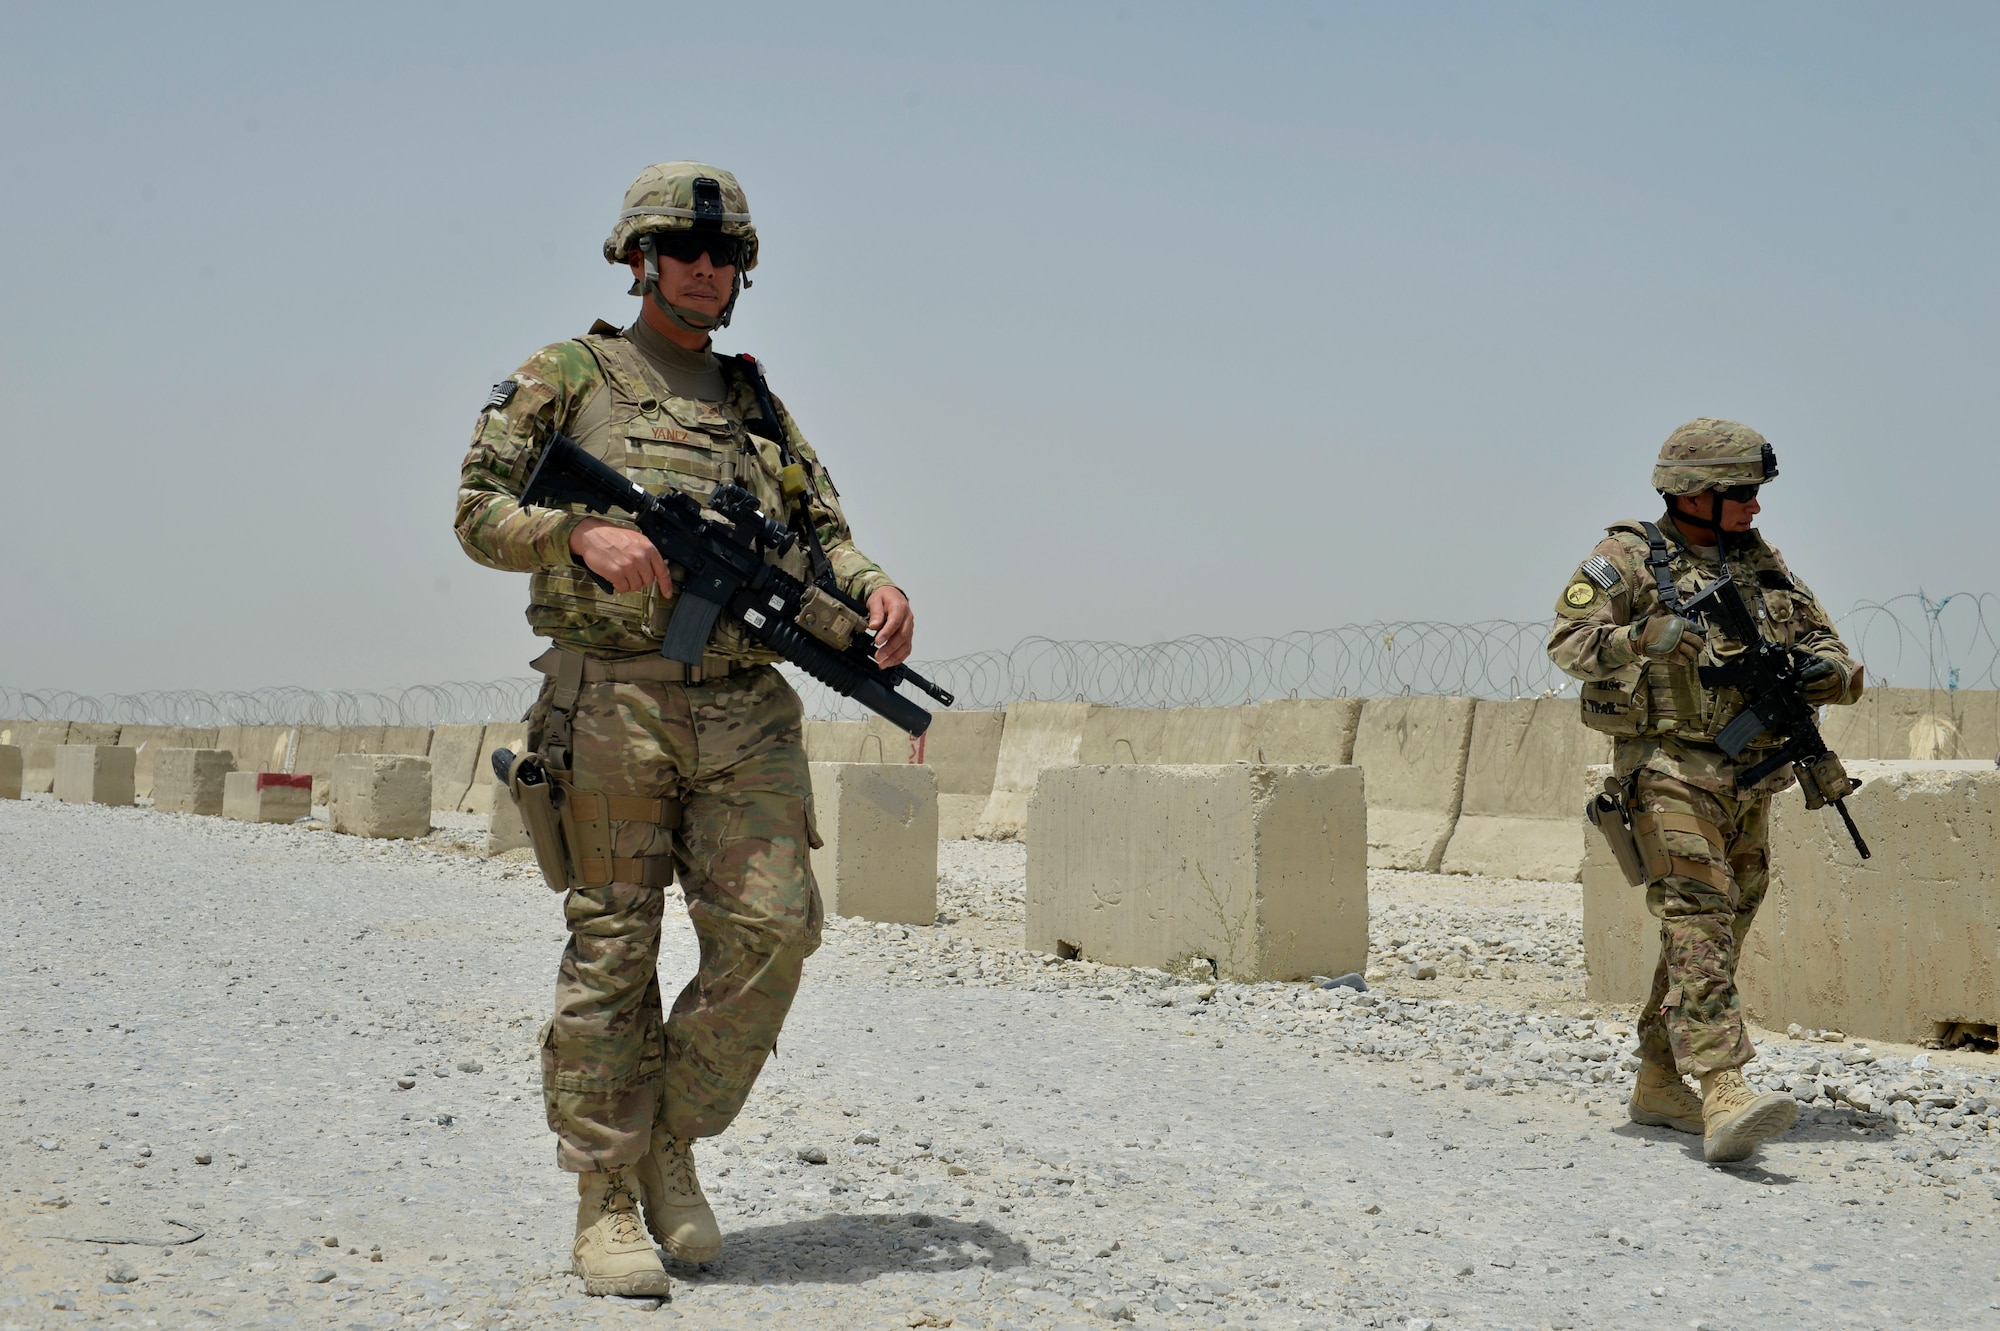 Staff Sgt. Jesus Yanez performs perimeter patrol July 2, 2014, on Bagram Airfield, Afghanistan. Yanez has served in the Marine Corps, Army, Navy and Air Force. He is a 455th Expeditionary Base Defense Squadron defender. (U.S. Air Force photo/Staff Sgt. Evelyn Chavez)